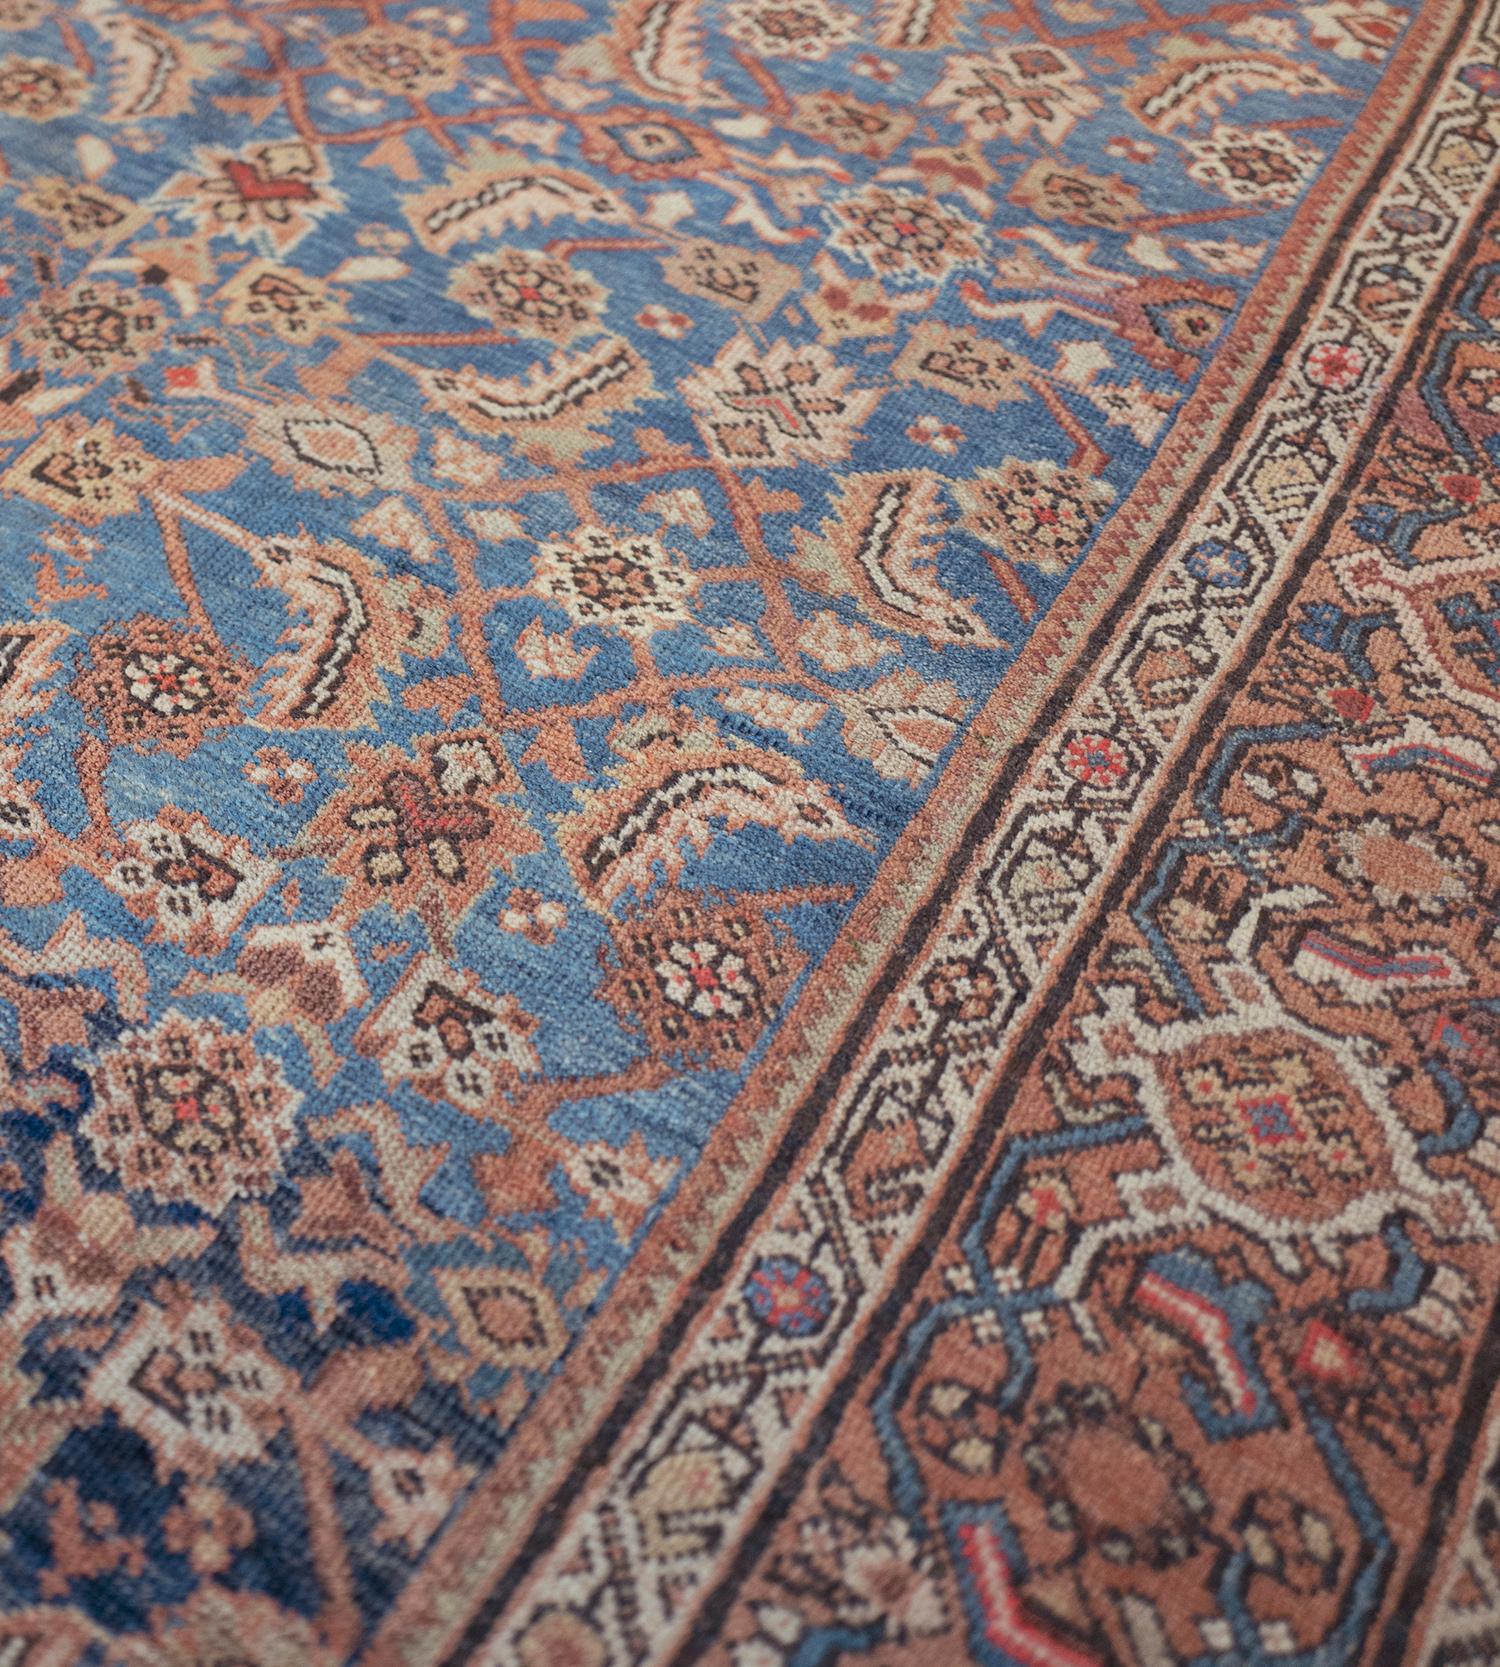 Wool Hand-Woven Late 19th Century Sultanabad Rug from West Persia